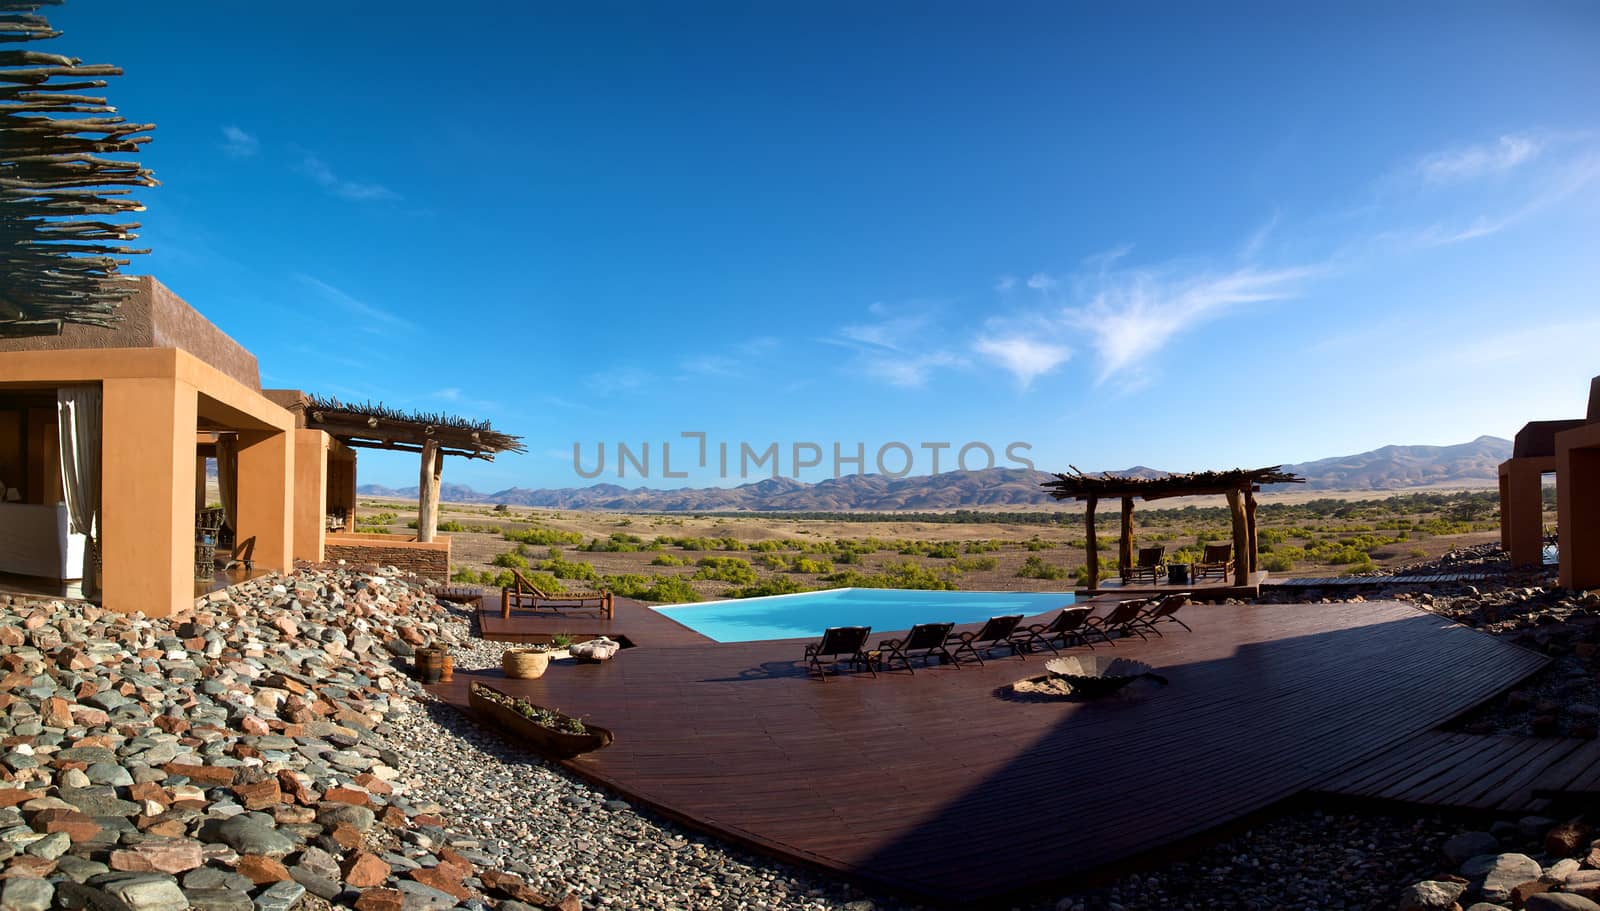 Incredible Lodge in Puros, Conservation area in Kaokoland - Namibia, 2010